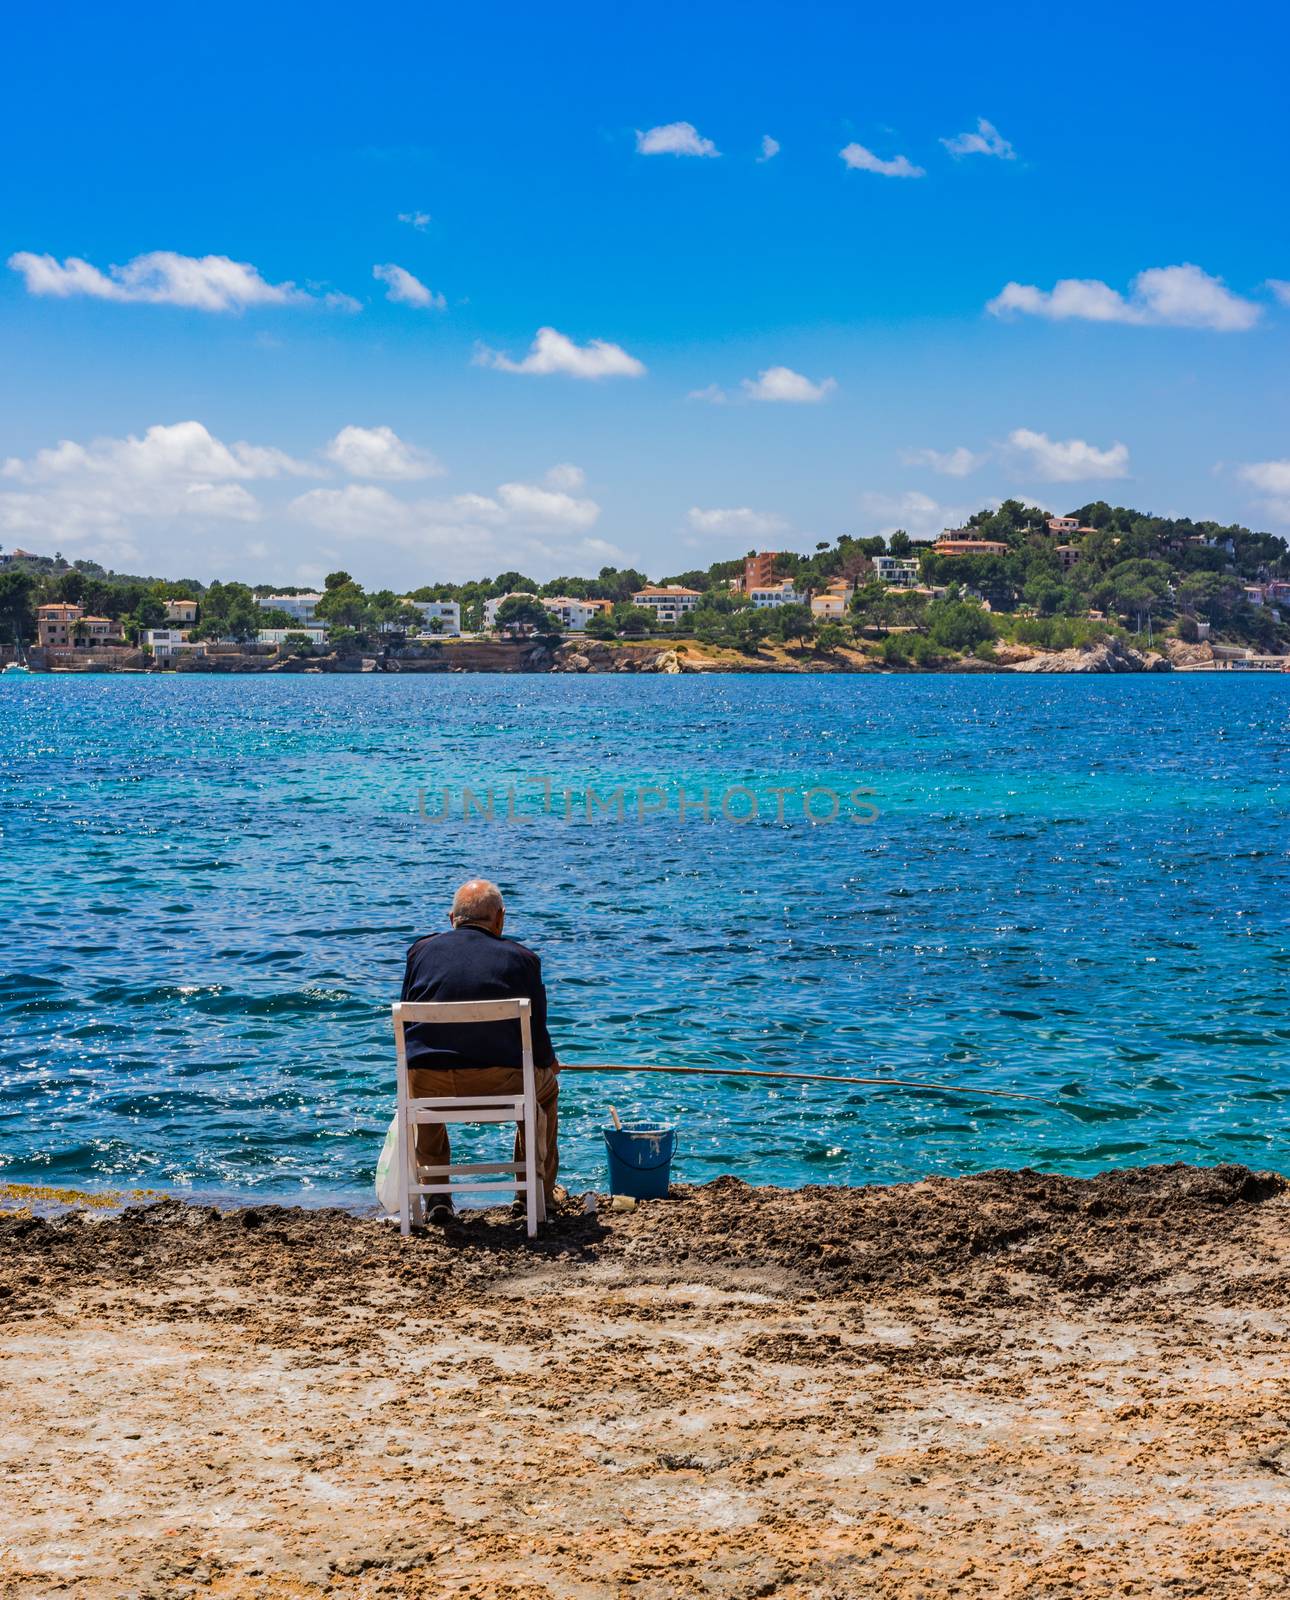 Old man is fishing at the sea by Vulcano